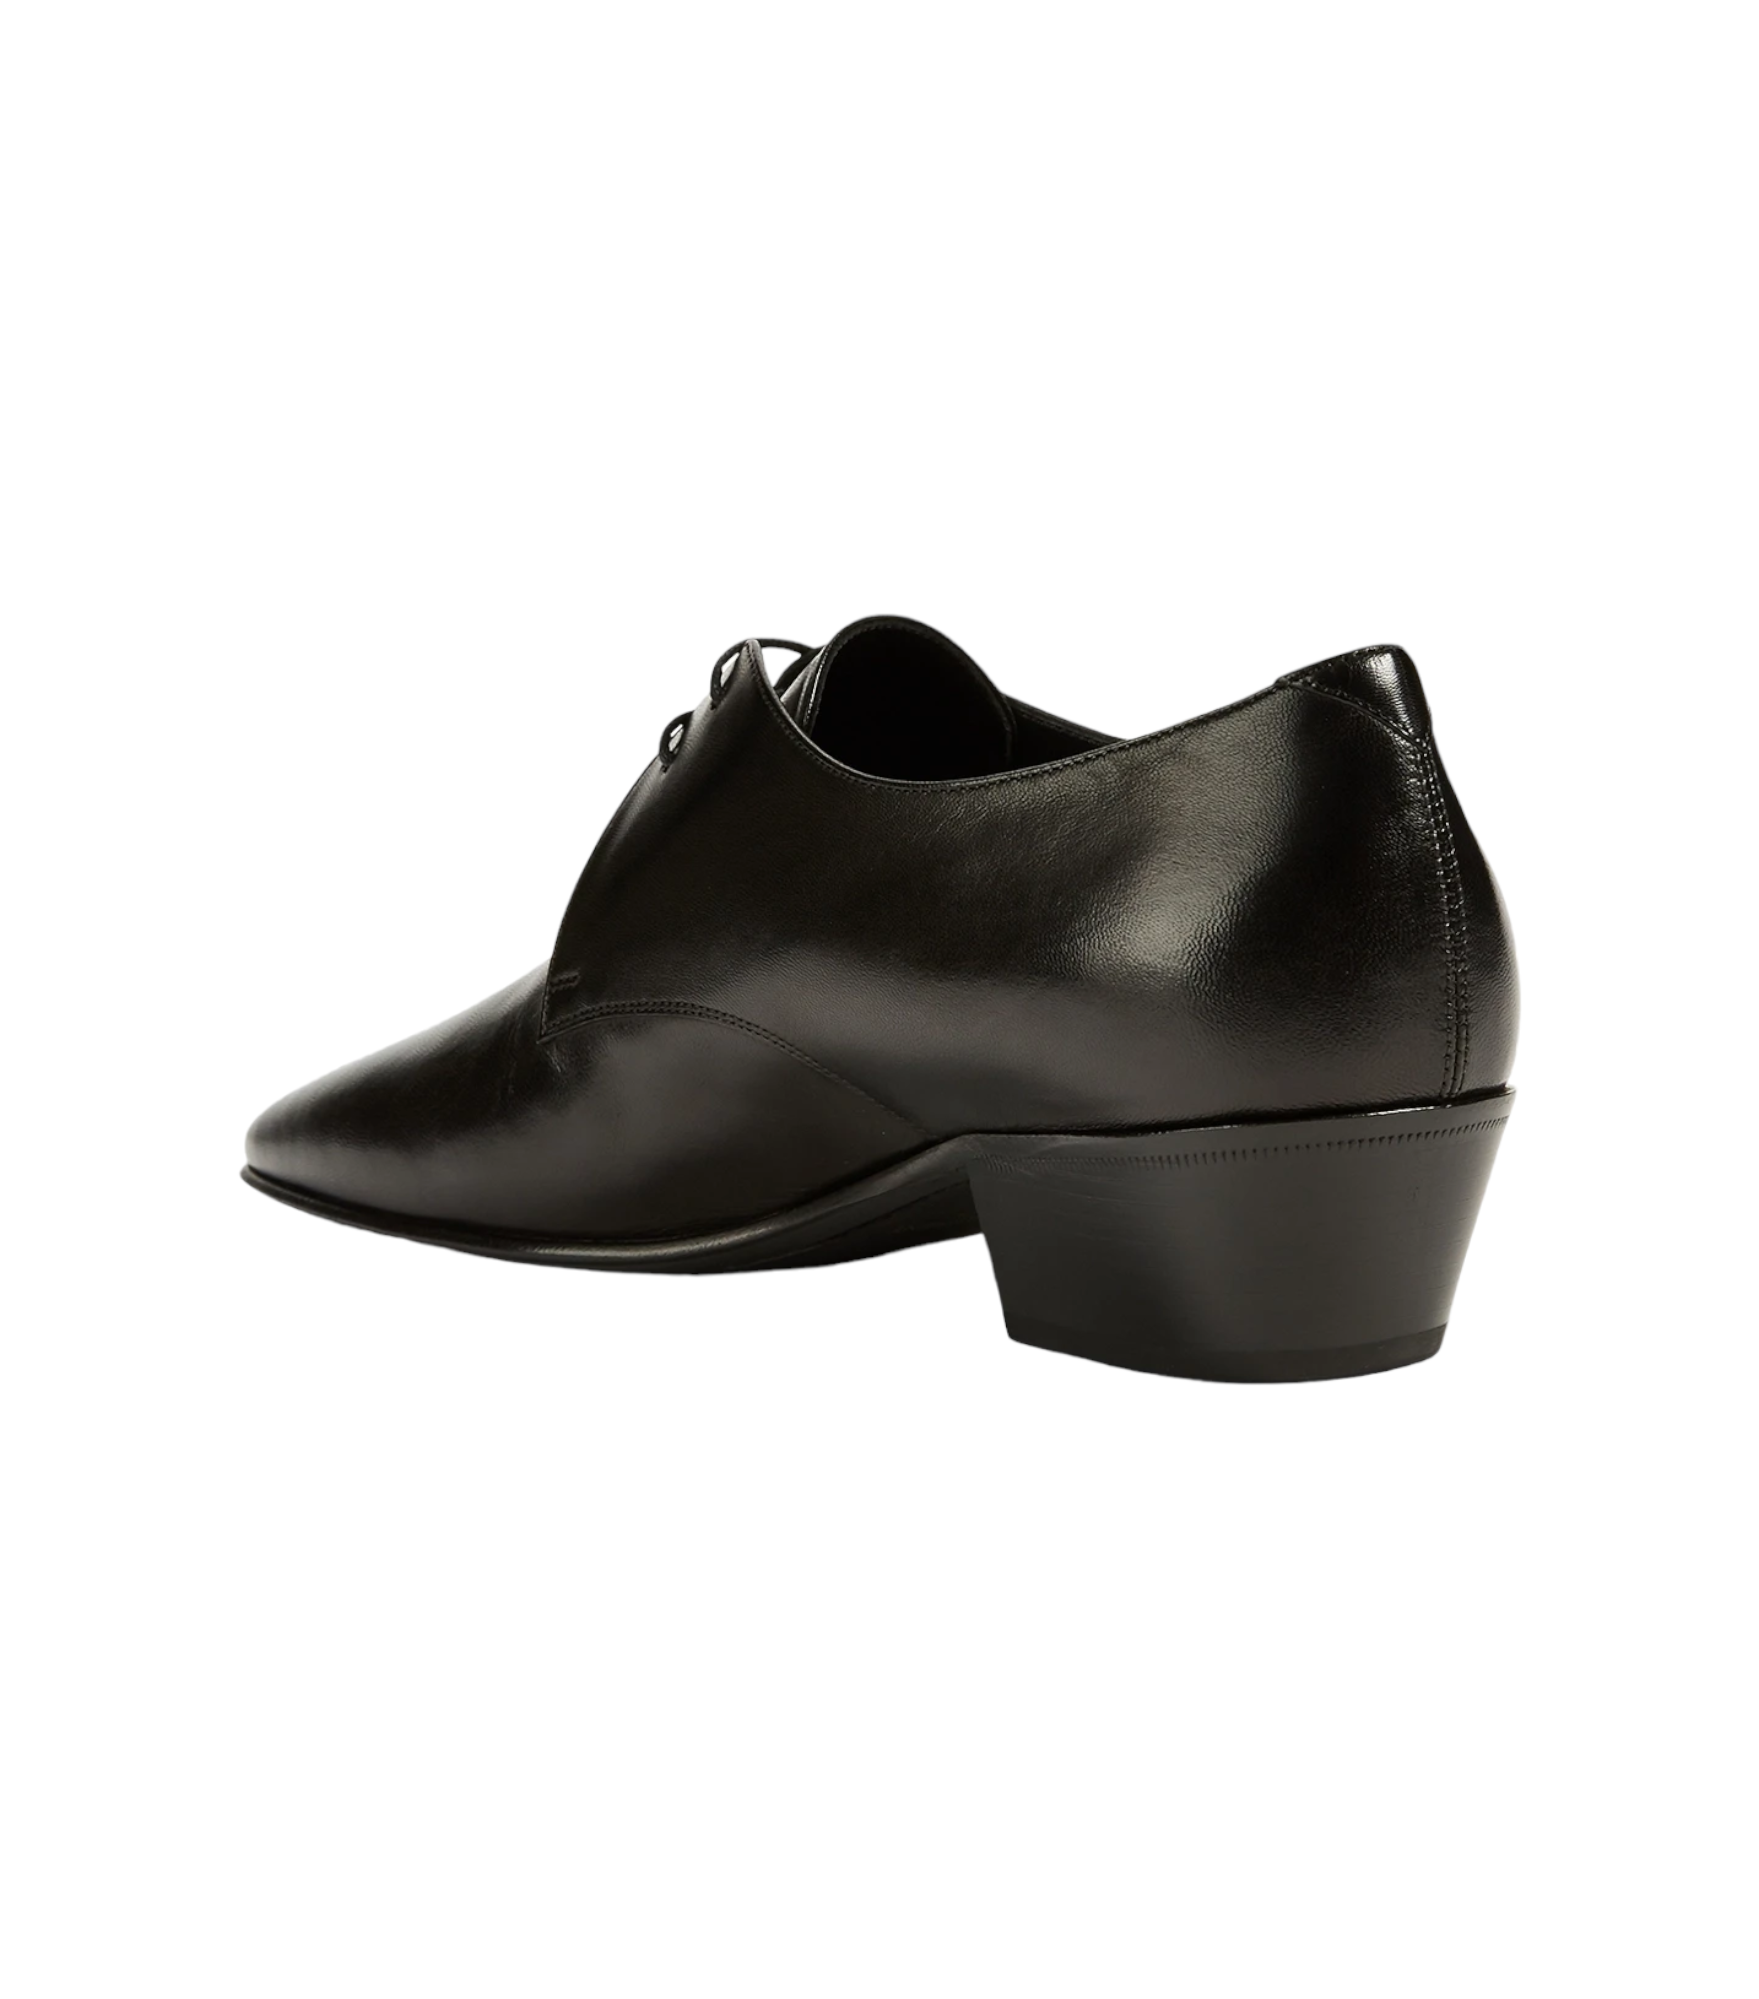 Saint Laurent Billy Derbies in Smooth Leather